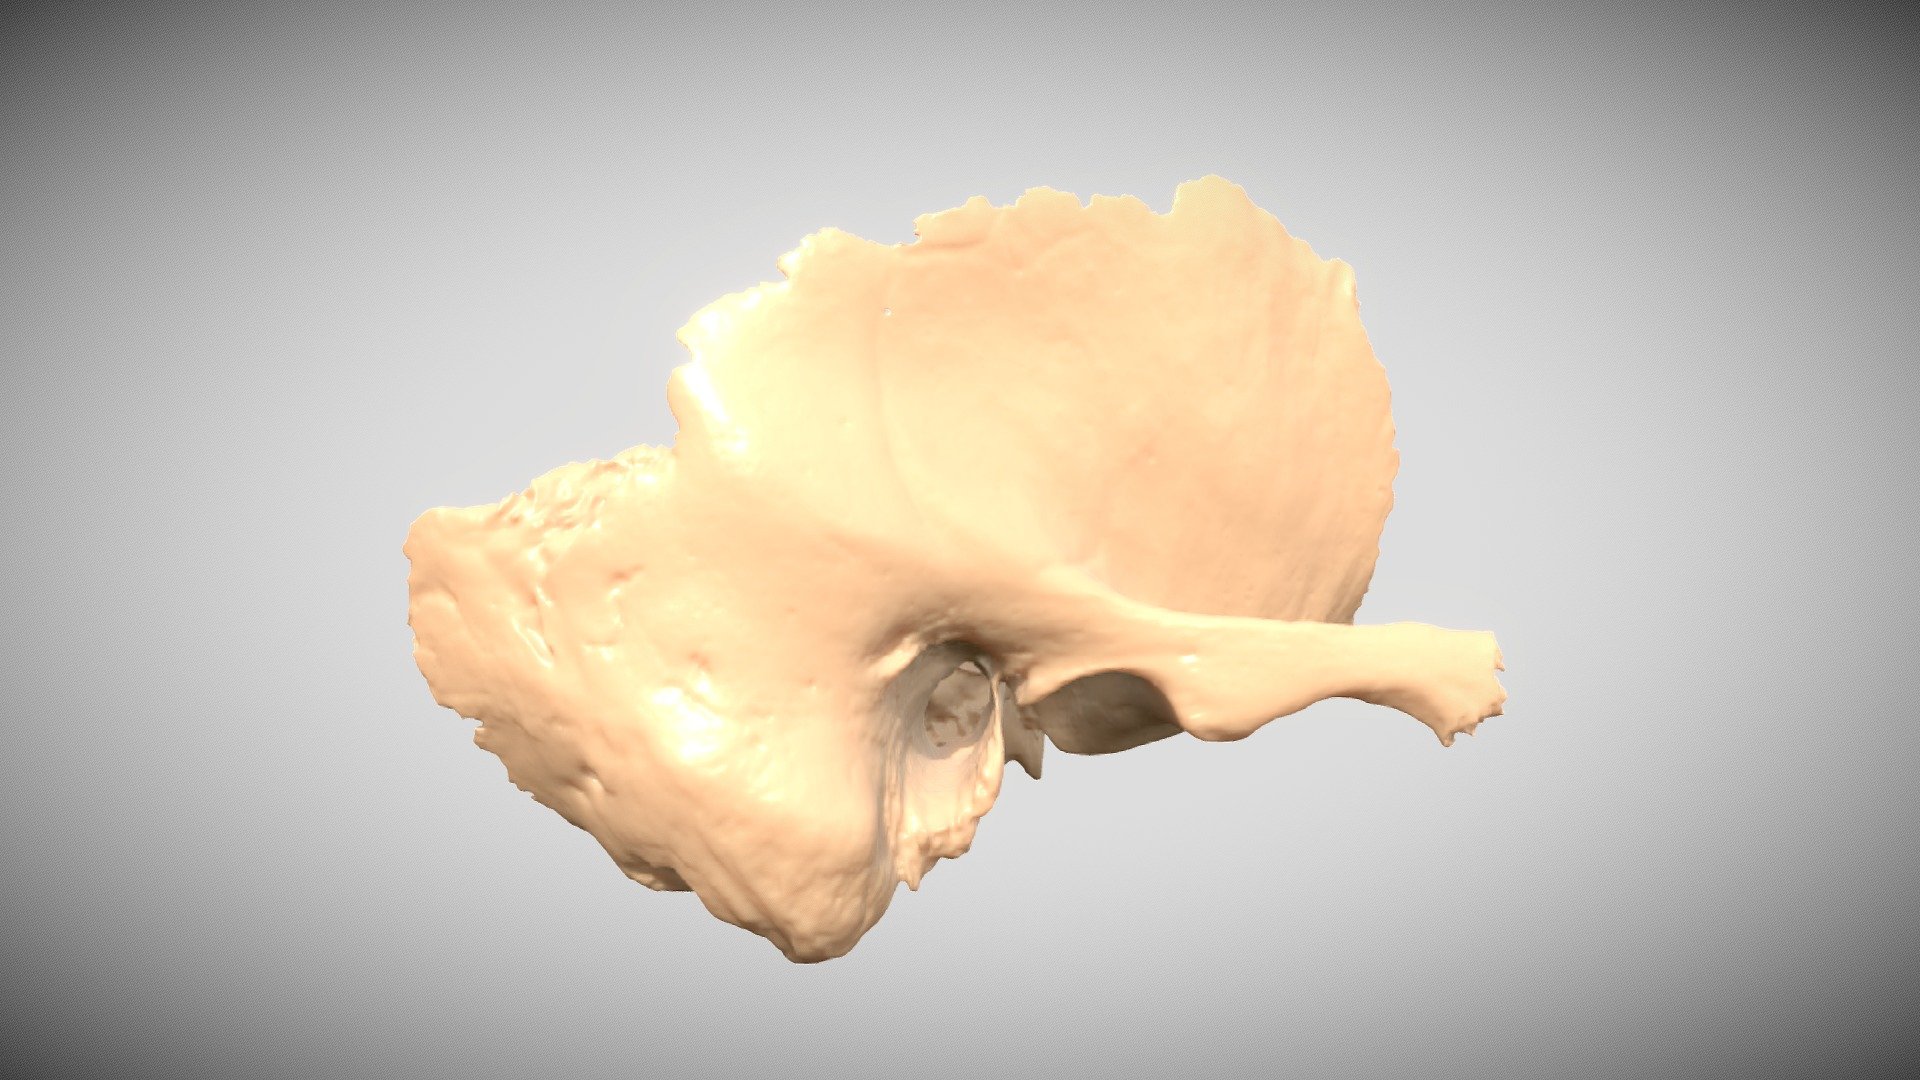 Labelled temporal bone, based on micro CT scan - Temporal bone - 3D model by UCSF Balance and Falls Center (@UCSF_Balance_Falls) 3d model